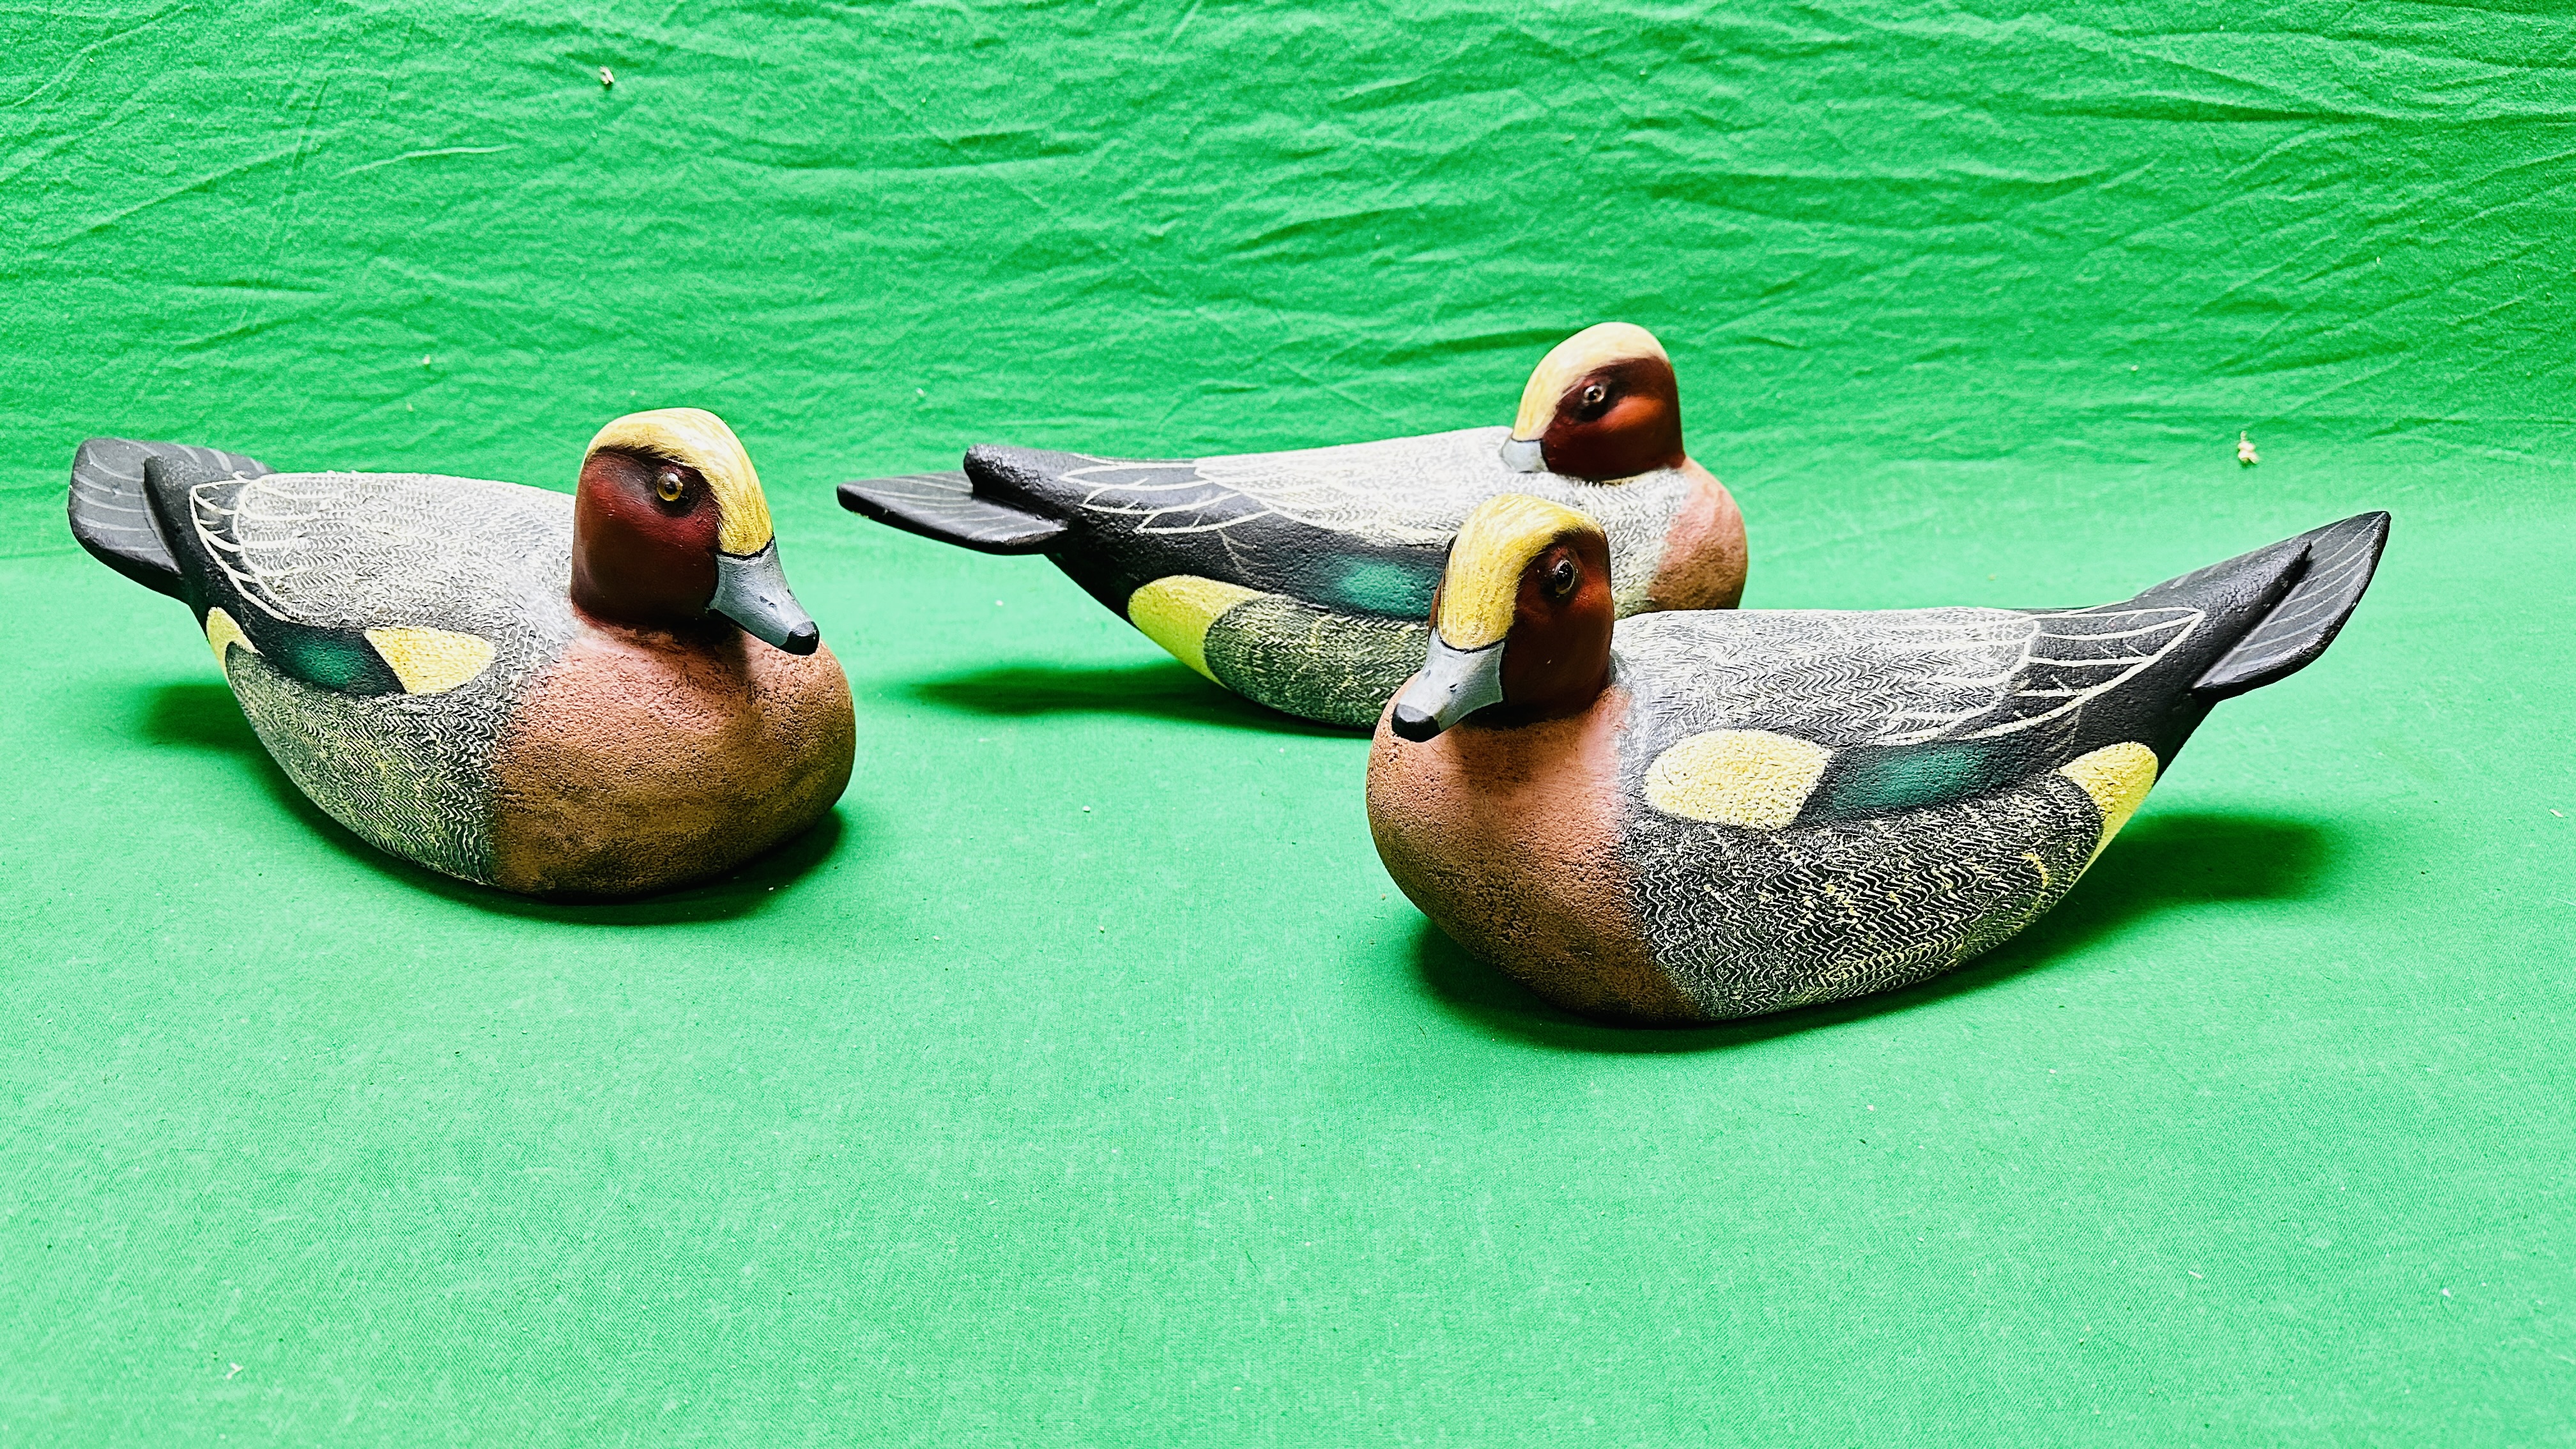 A HANDCRAFTED SET OF THREE DUCK DECOYS HAVING HANDPAINTED DETAIL AND GLASS EYES.